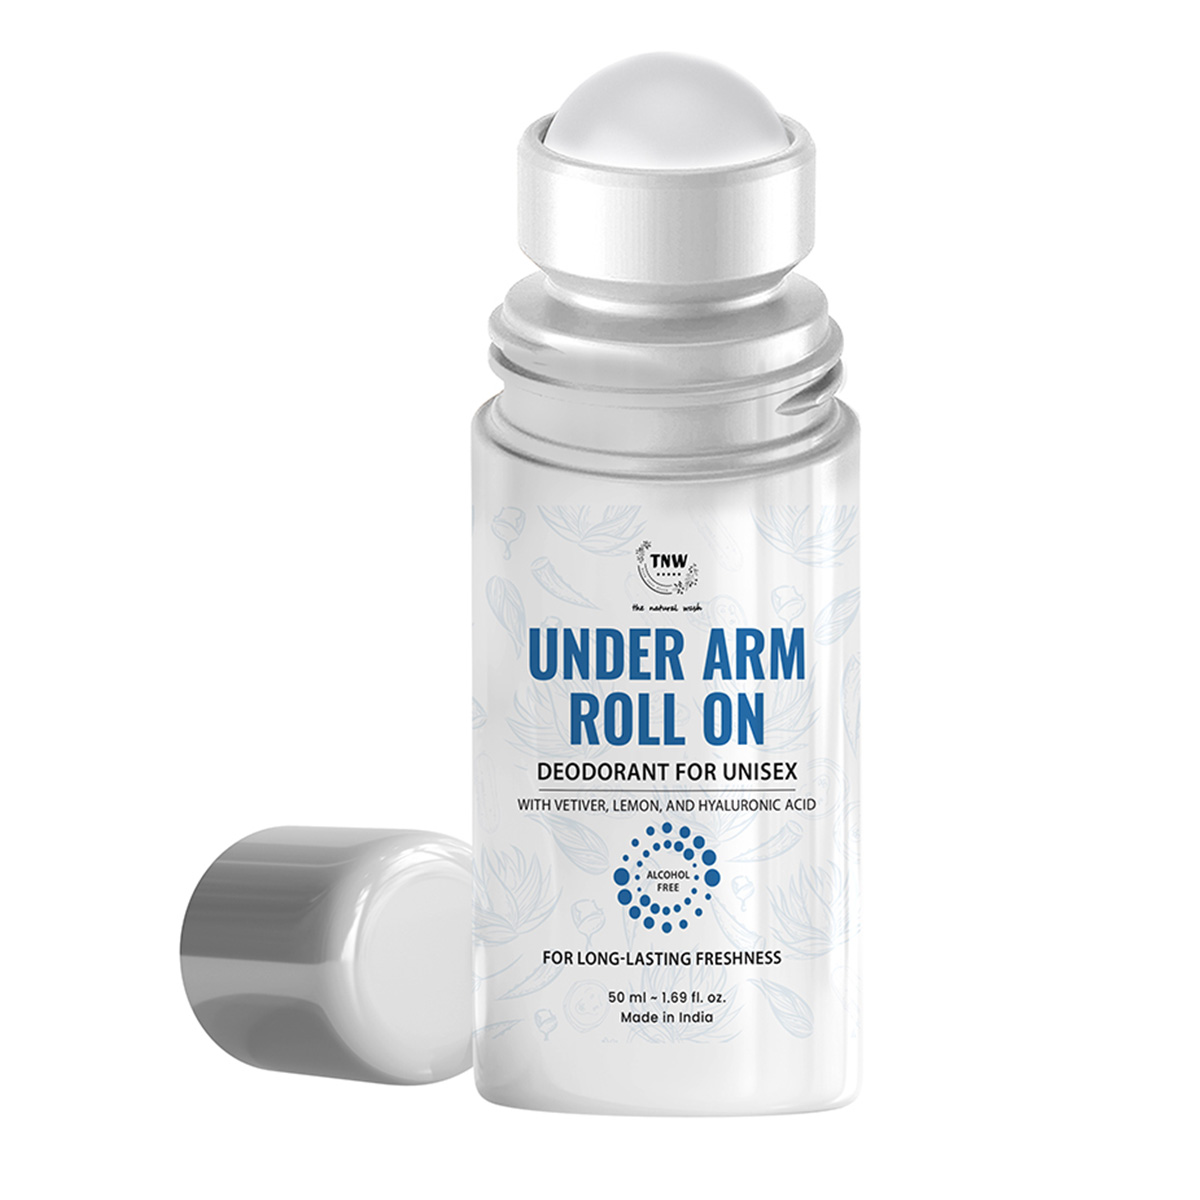 TNW - The Natural Wash Under Arm Roll-On Deodorant With Vetiver & Hyaluronic Acid, 50ml